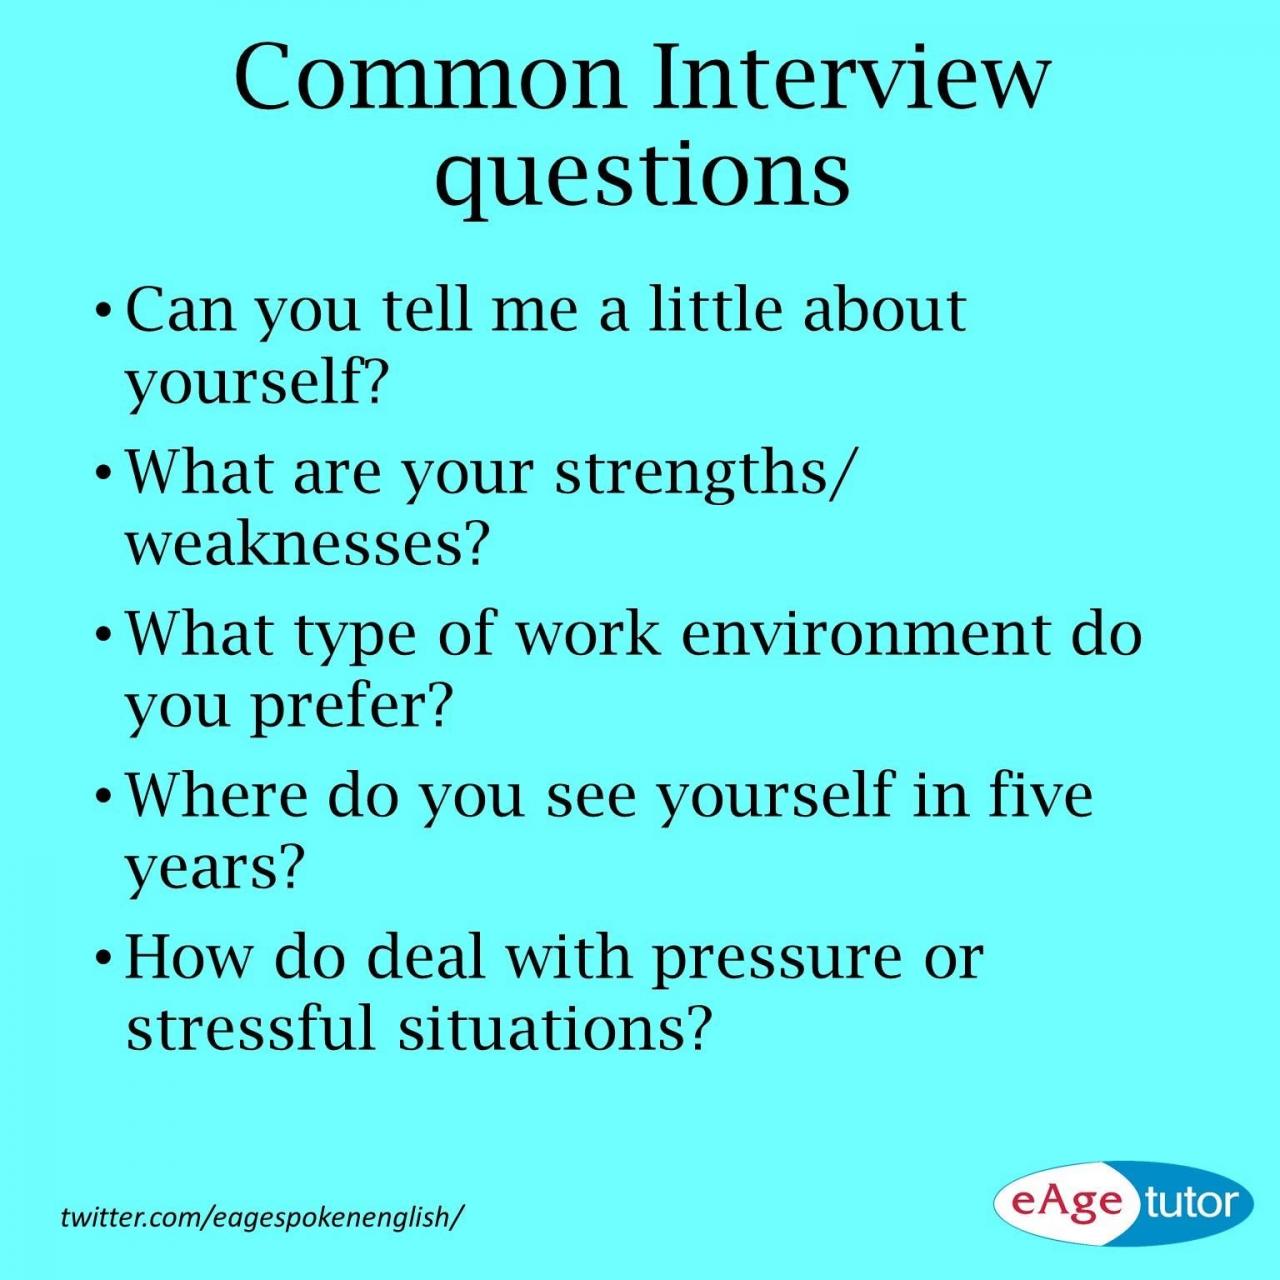 Basic questions in an interview